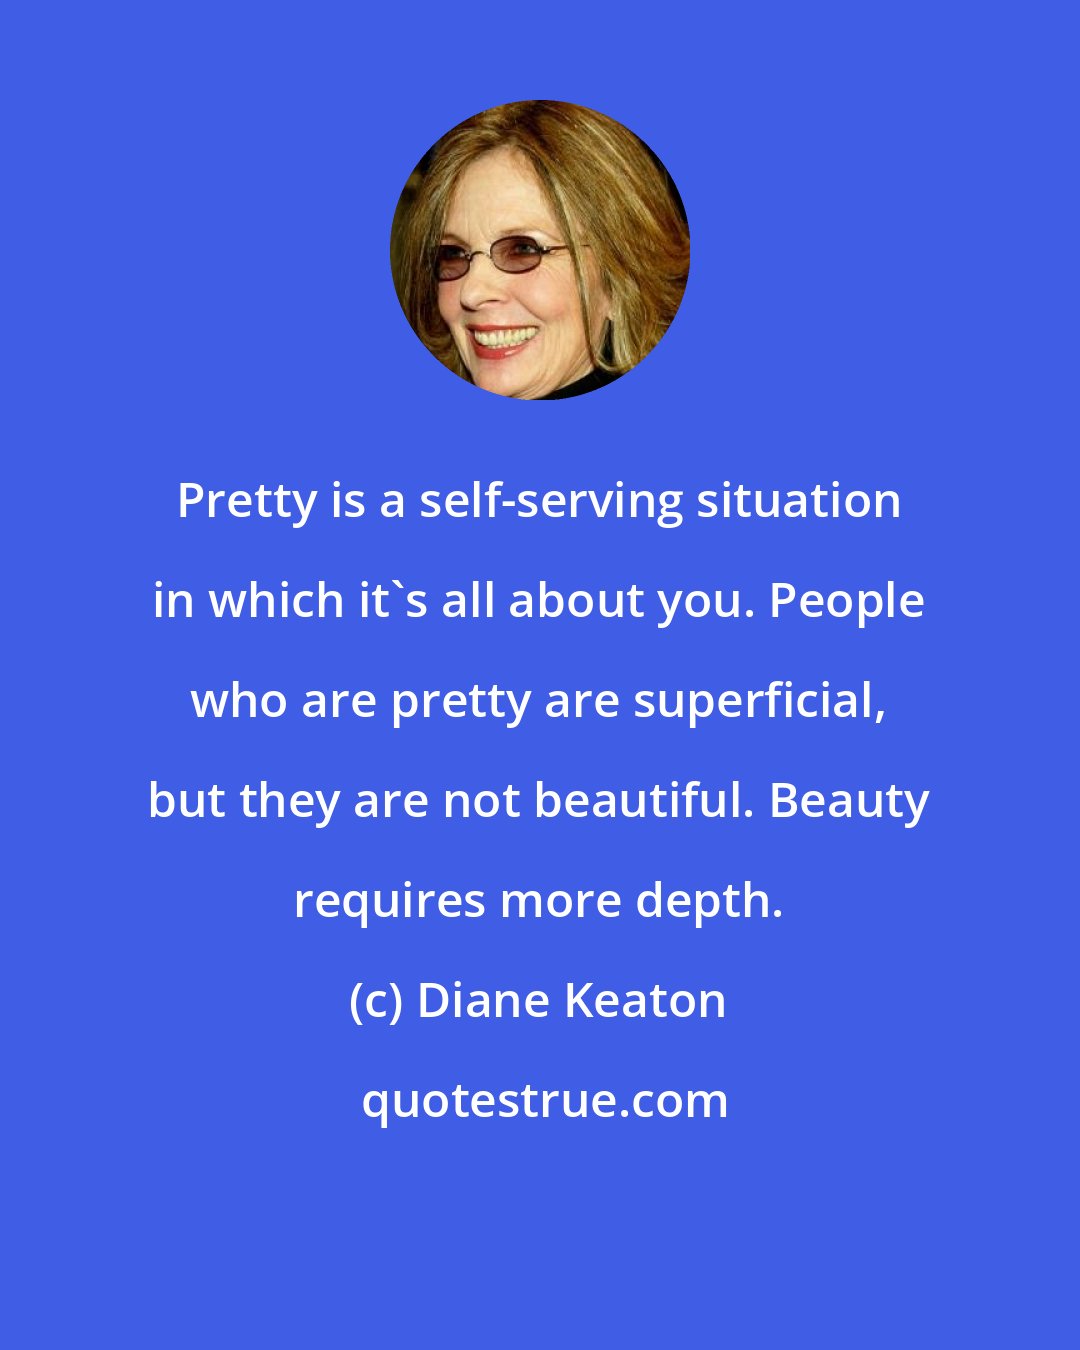 Diane Keaton: Pretty is a self-serving situation in which it's all about you. People who are pretty are superficial, but they are not beautiful. Beauty requires more depth.